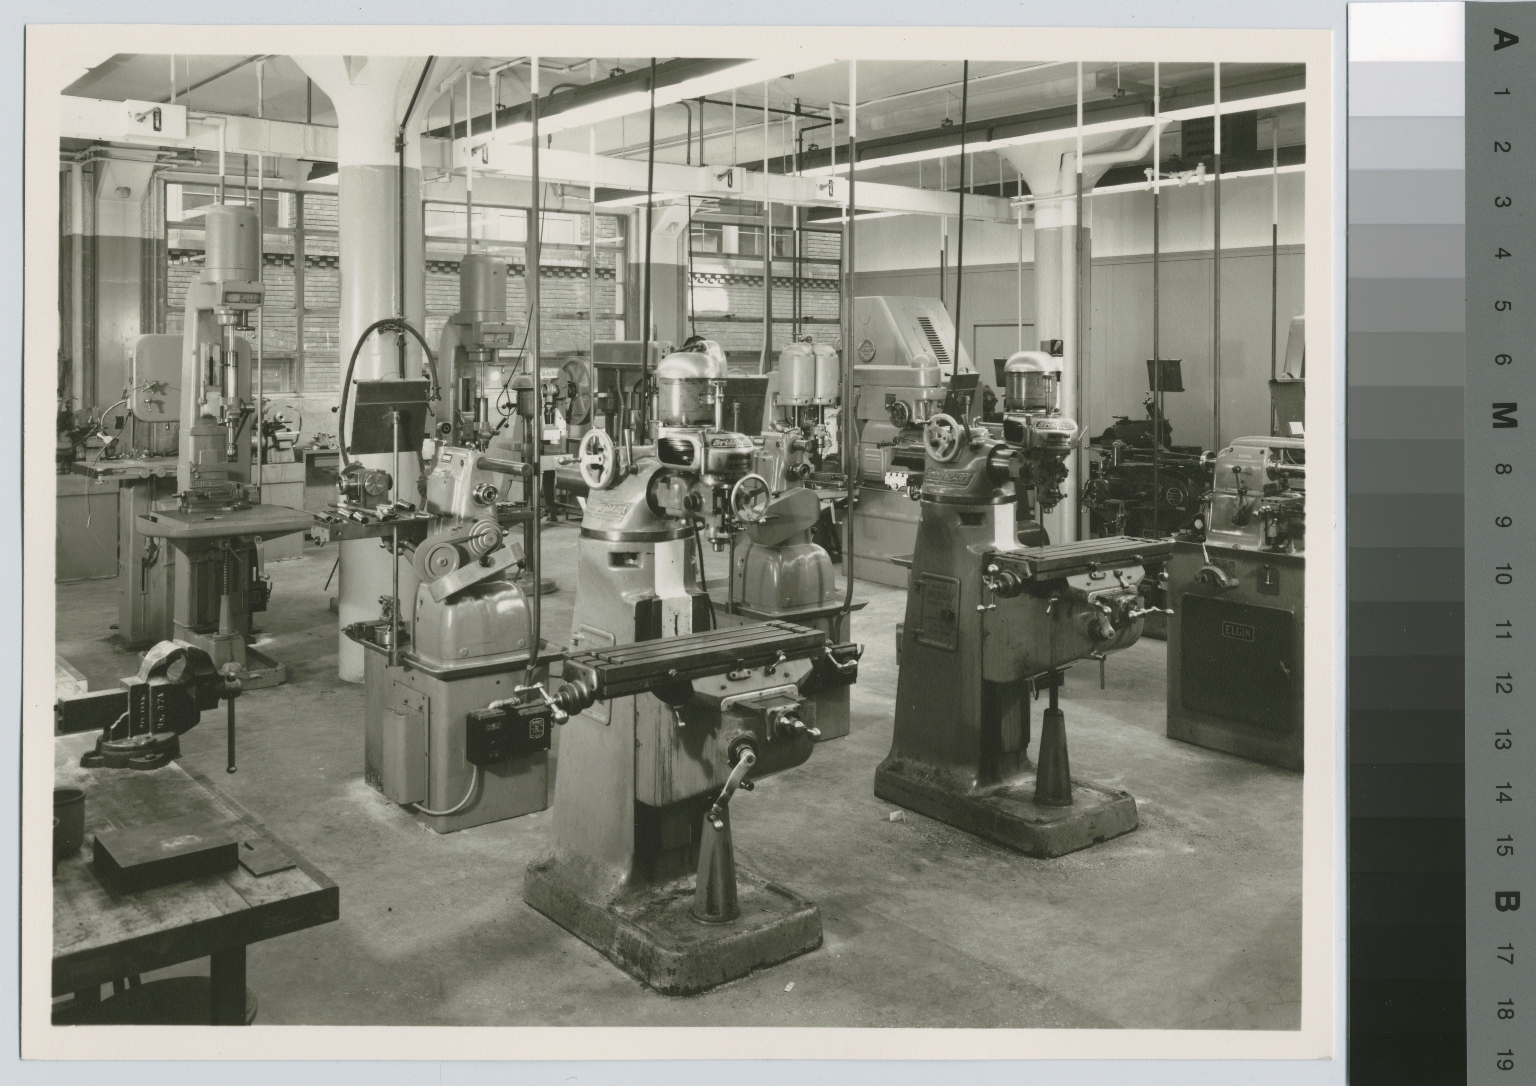 Equipment room, Mechanical Department, George H. Clark Building. Rochester Institute of Technology